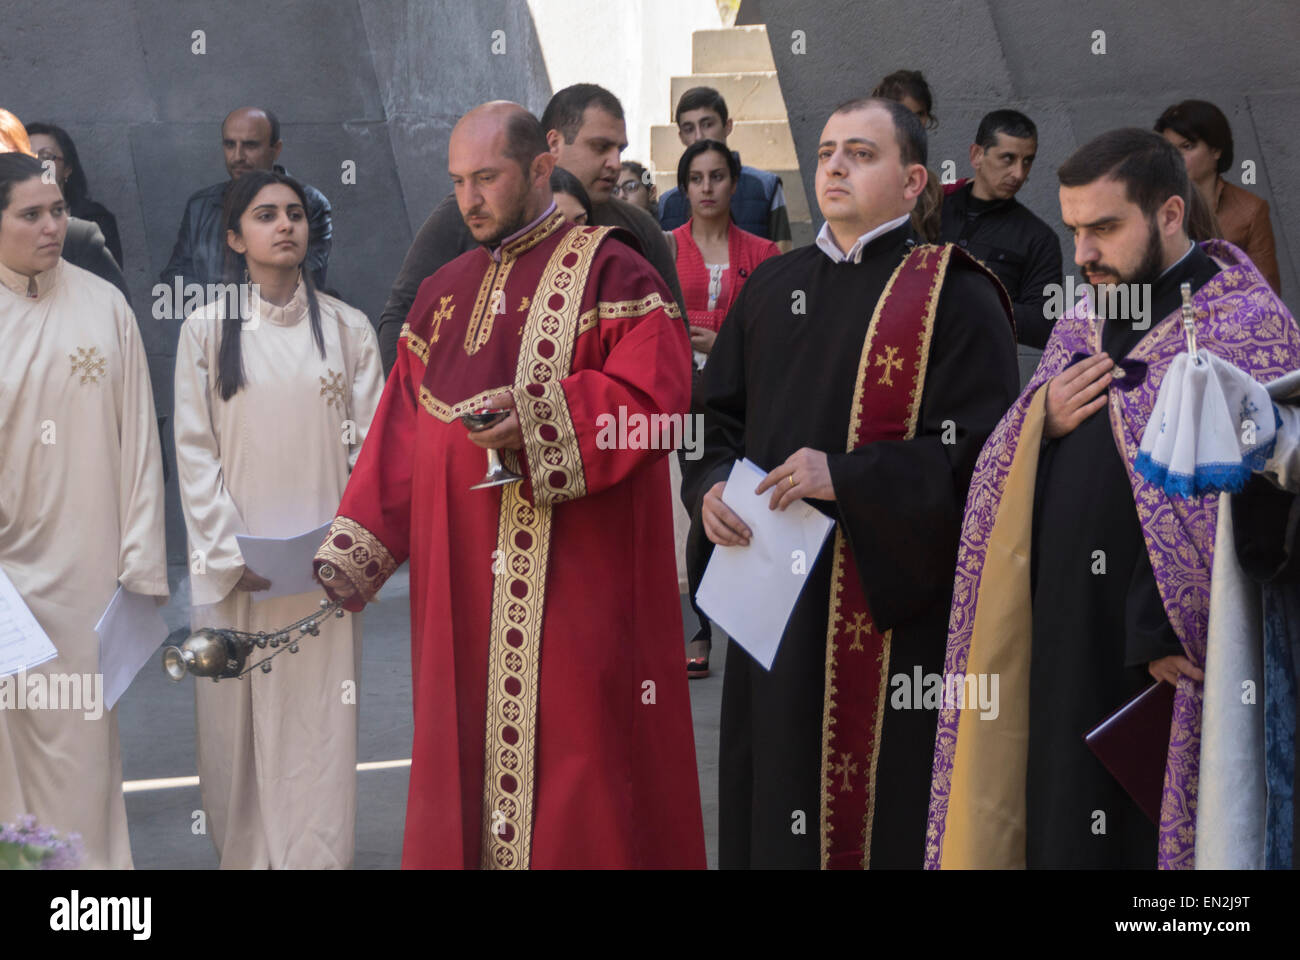 Yerevan, Armenia. 25th Apr, 2015. Clergy leading commemoration at 100th anniversary of the Armenian genocide at the Armenian Genocide Memorial in Yerevan on April 25, 2015. Credit:  Dennis Cox/Alamy Live News Stock Photo